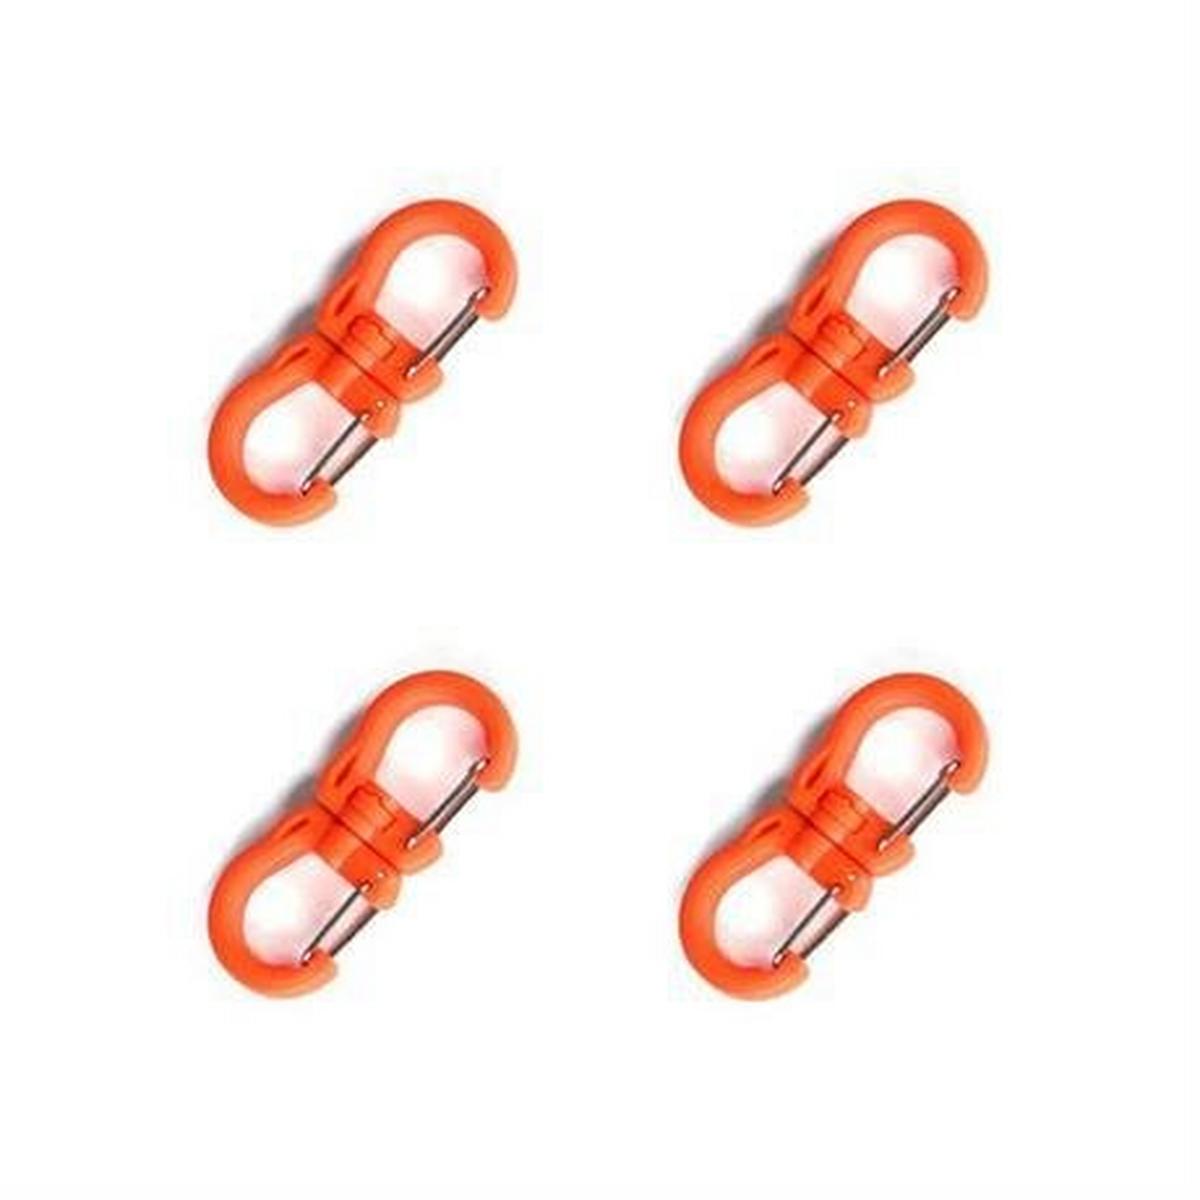 Tyny Tools Swivel Carabiner Clips SMALL Orange (Pack of 4)